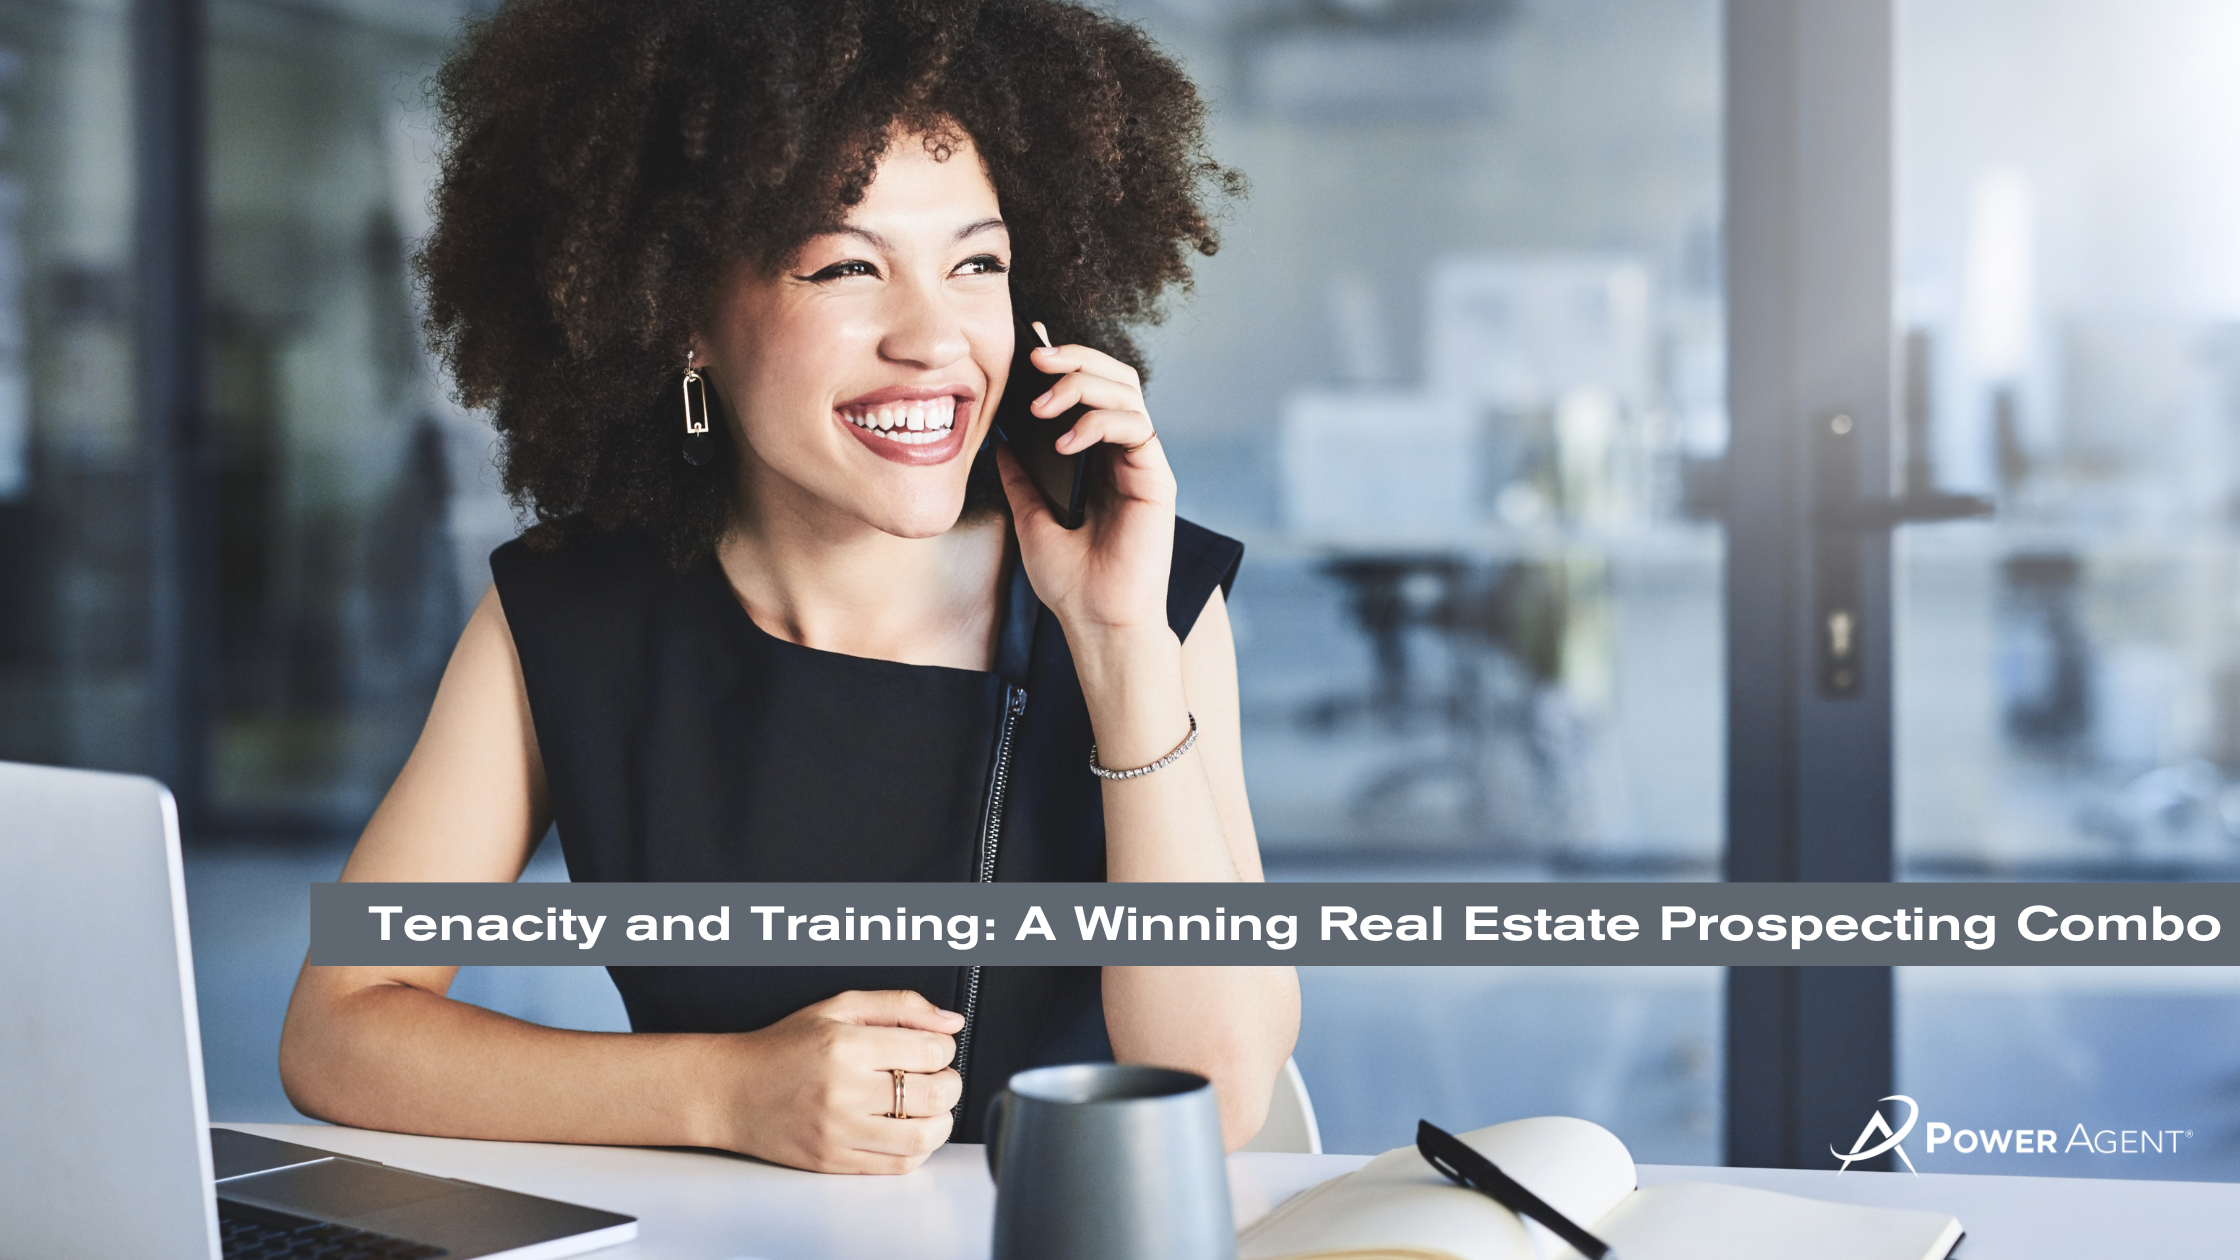 Tenacity and Training: A Winning Real Estate Prospecting Combo